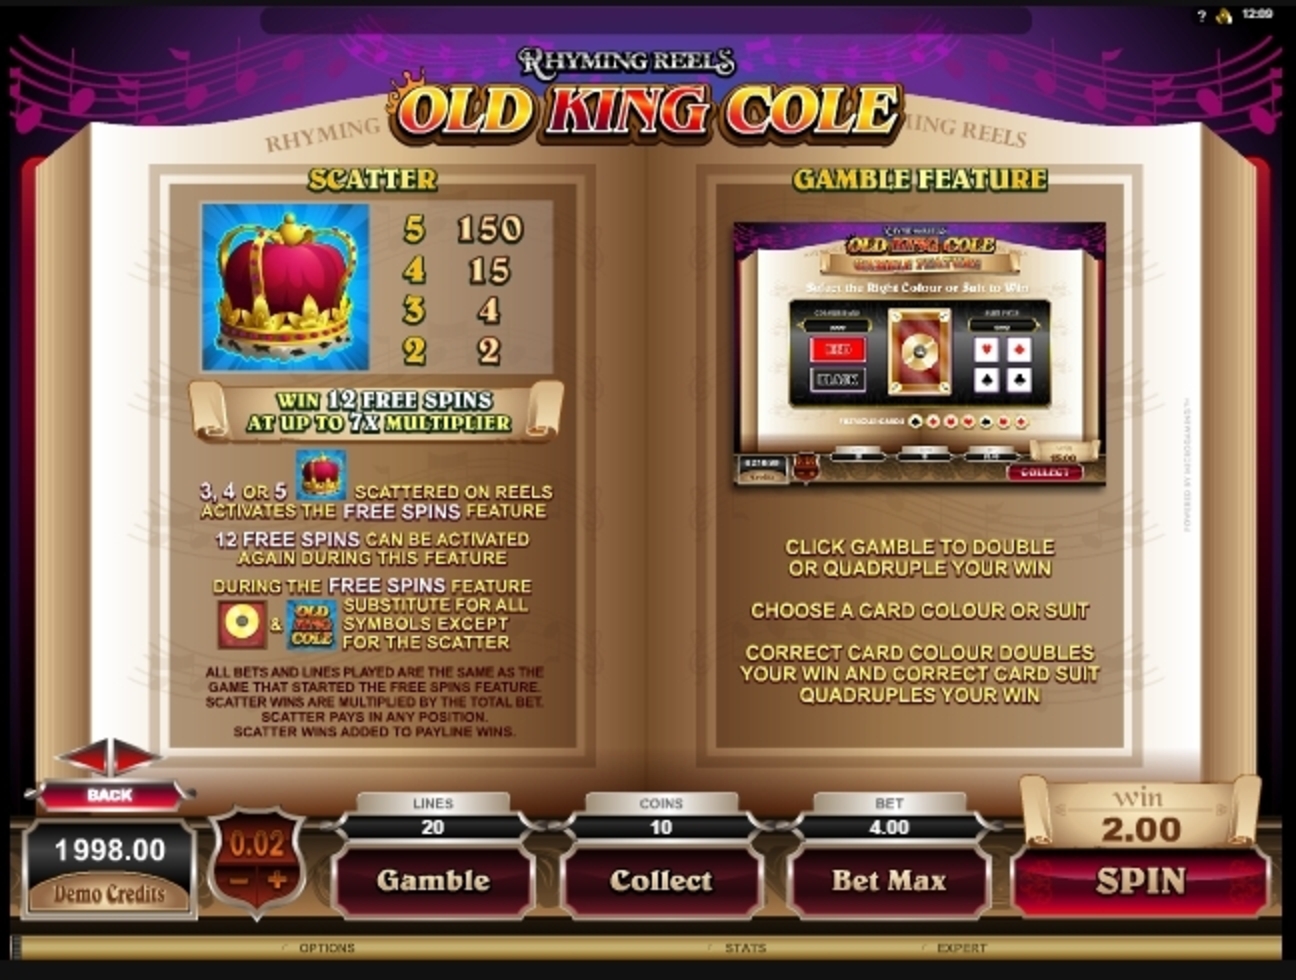 Info of Old King Cole Slot Game by Microgaming